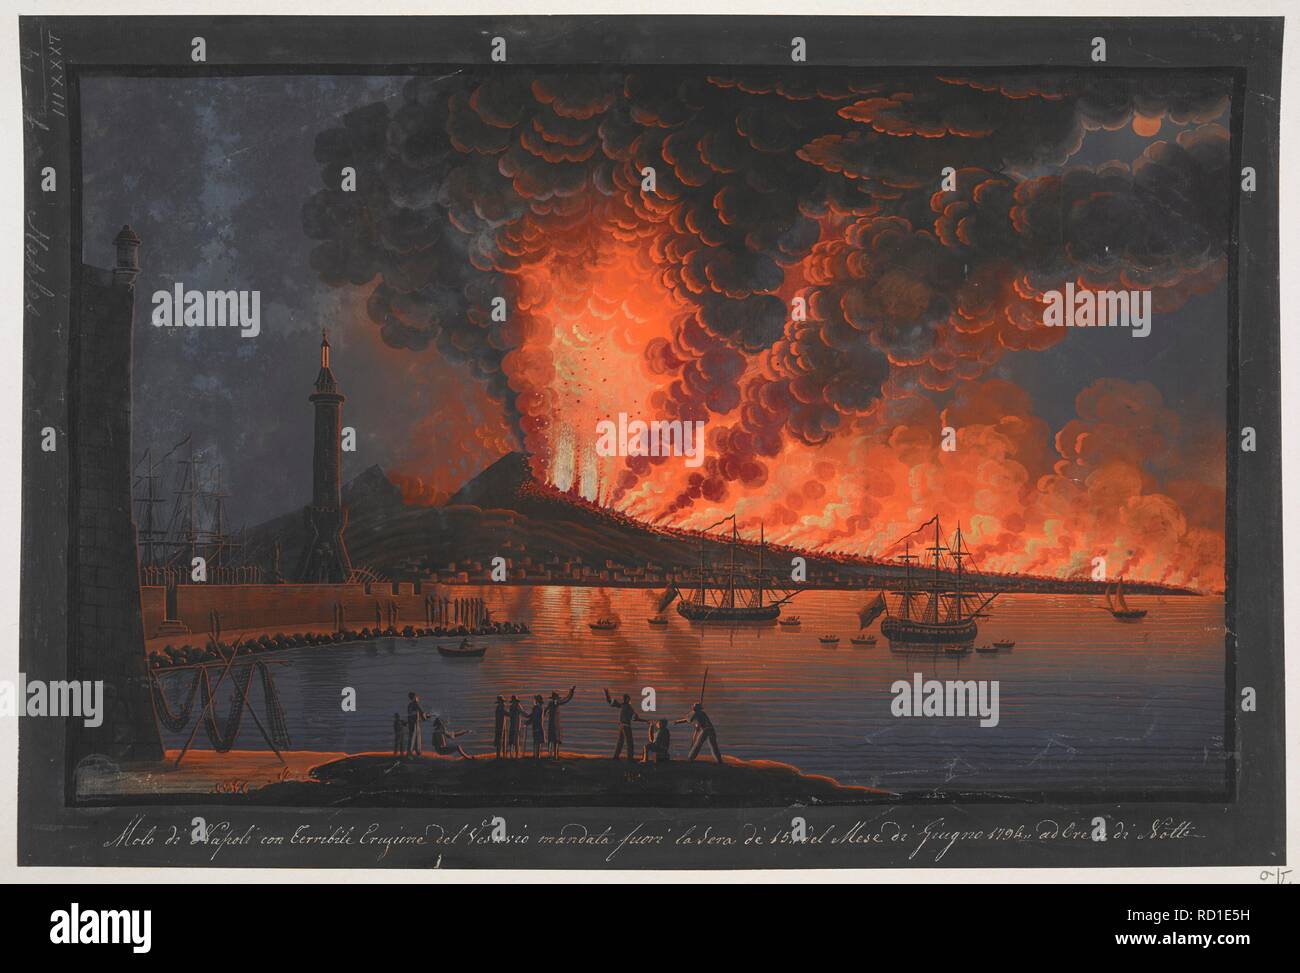 Eruption of Mount Vesuvius. Nocturnal scene; a group of men watch the eruption of Mount Vesuvius from a pier next to a tower, with harbour and lighthouse at left, sailing ships and Bay of Naples at right and flames and clouds of smoke from the volcano covering the sky in the background; within painted frame with black edge, annotated with title in white ink below. Molo di Napoli, con terribile eruzione del Vesuvio mandata fuori la sera de 15 del mese di Giugno, 1794; ad ore 2 di notte. 1794. 1 drawing : gouache ; sheet 31.6 x 47.1 cm. Source: Maps K.Top.83.61.k. Language: Italian. Stock Photo